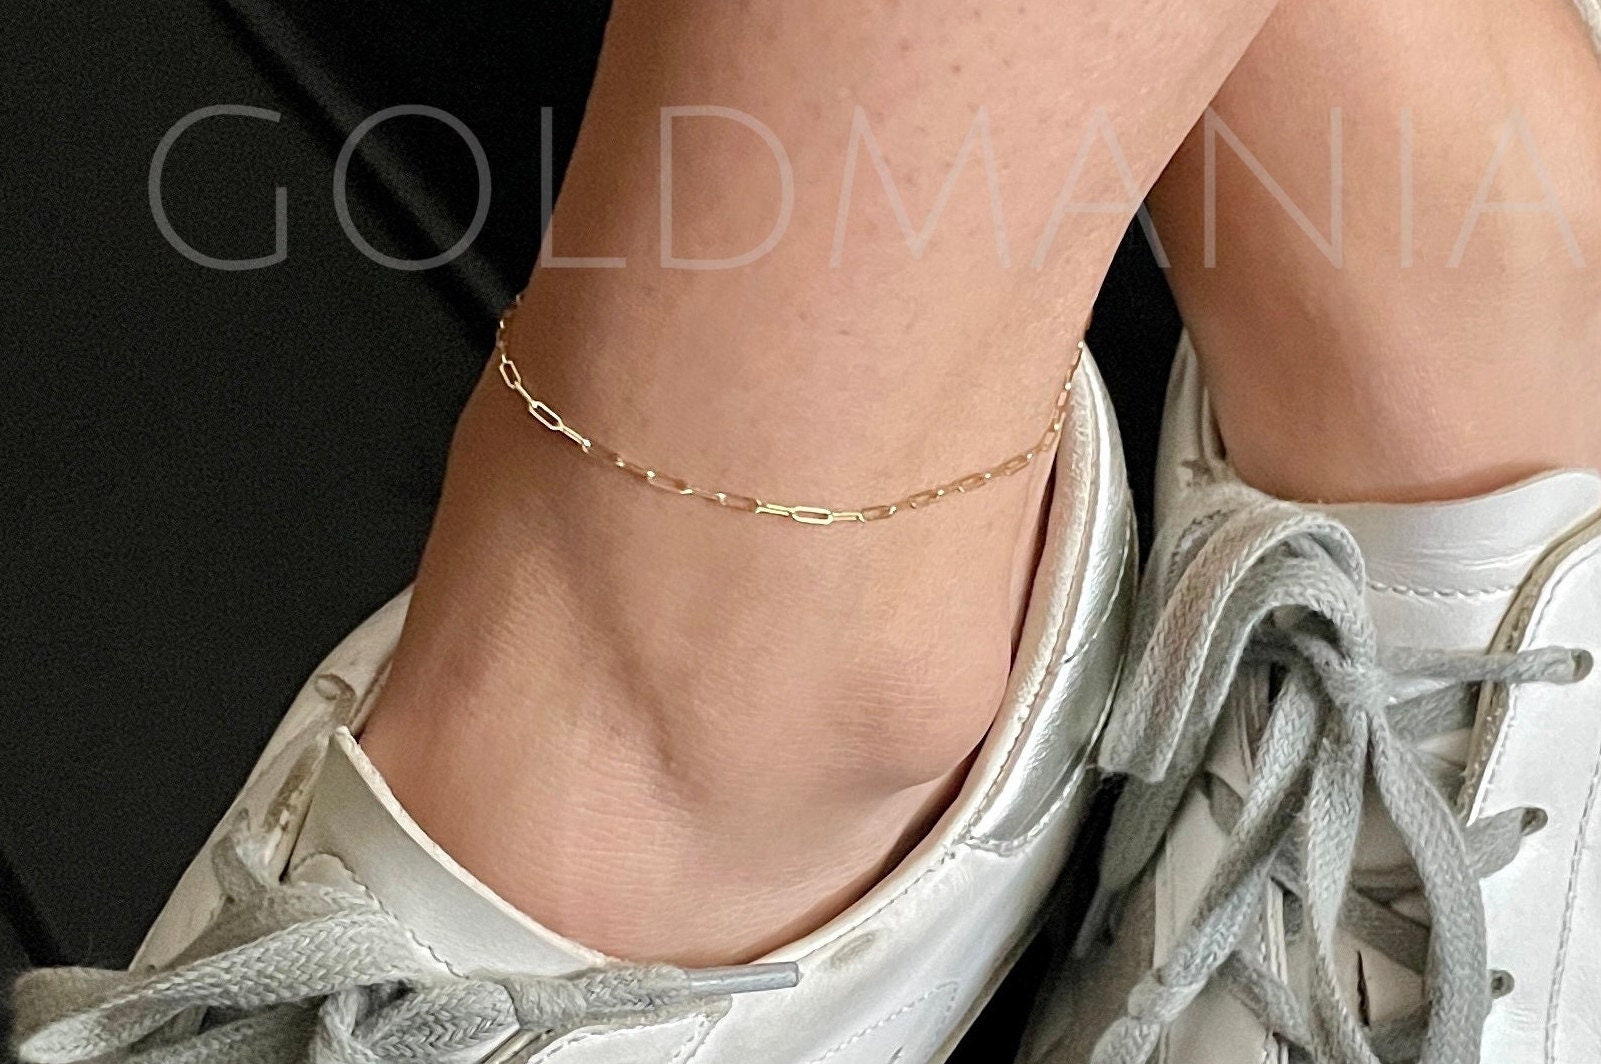 14K Gold Puffed Mariner Anklet Bracelet on a Rolo Chain – YanYa